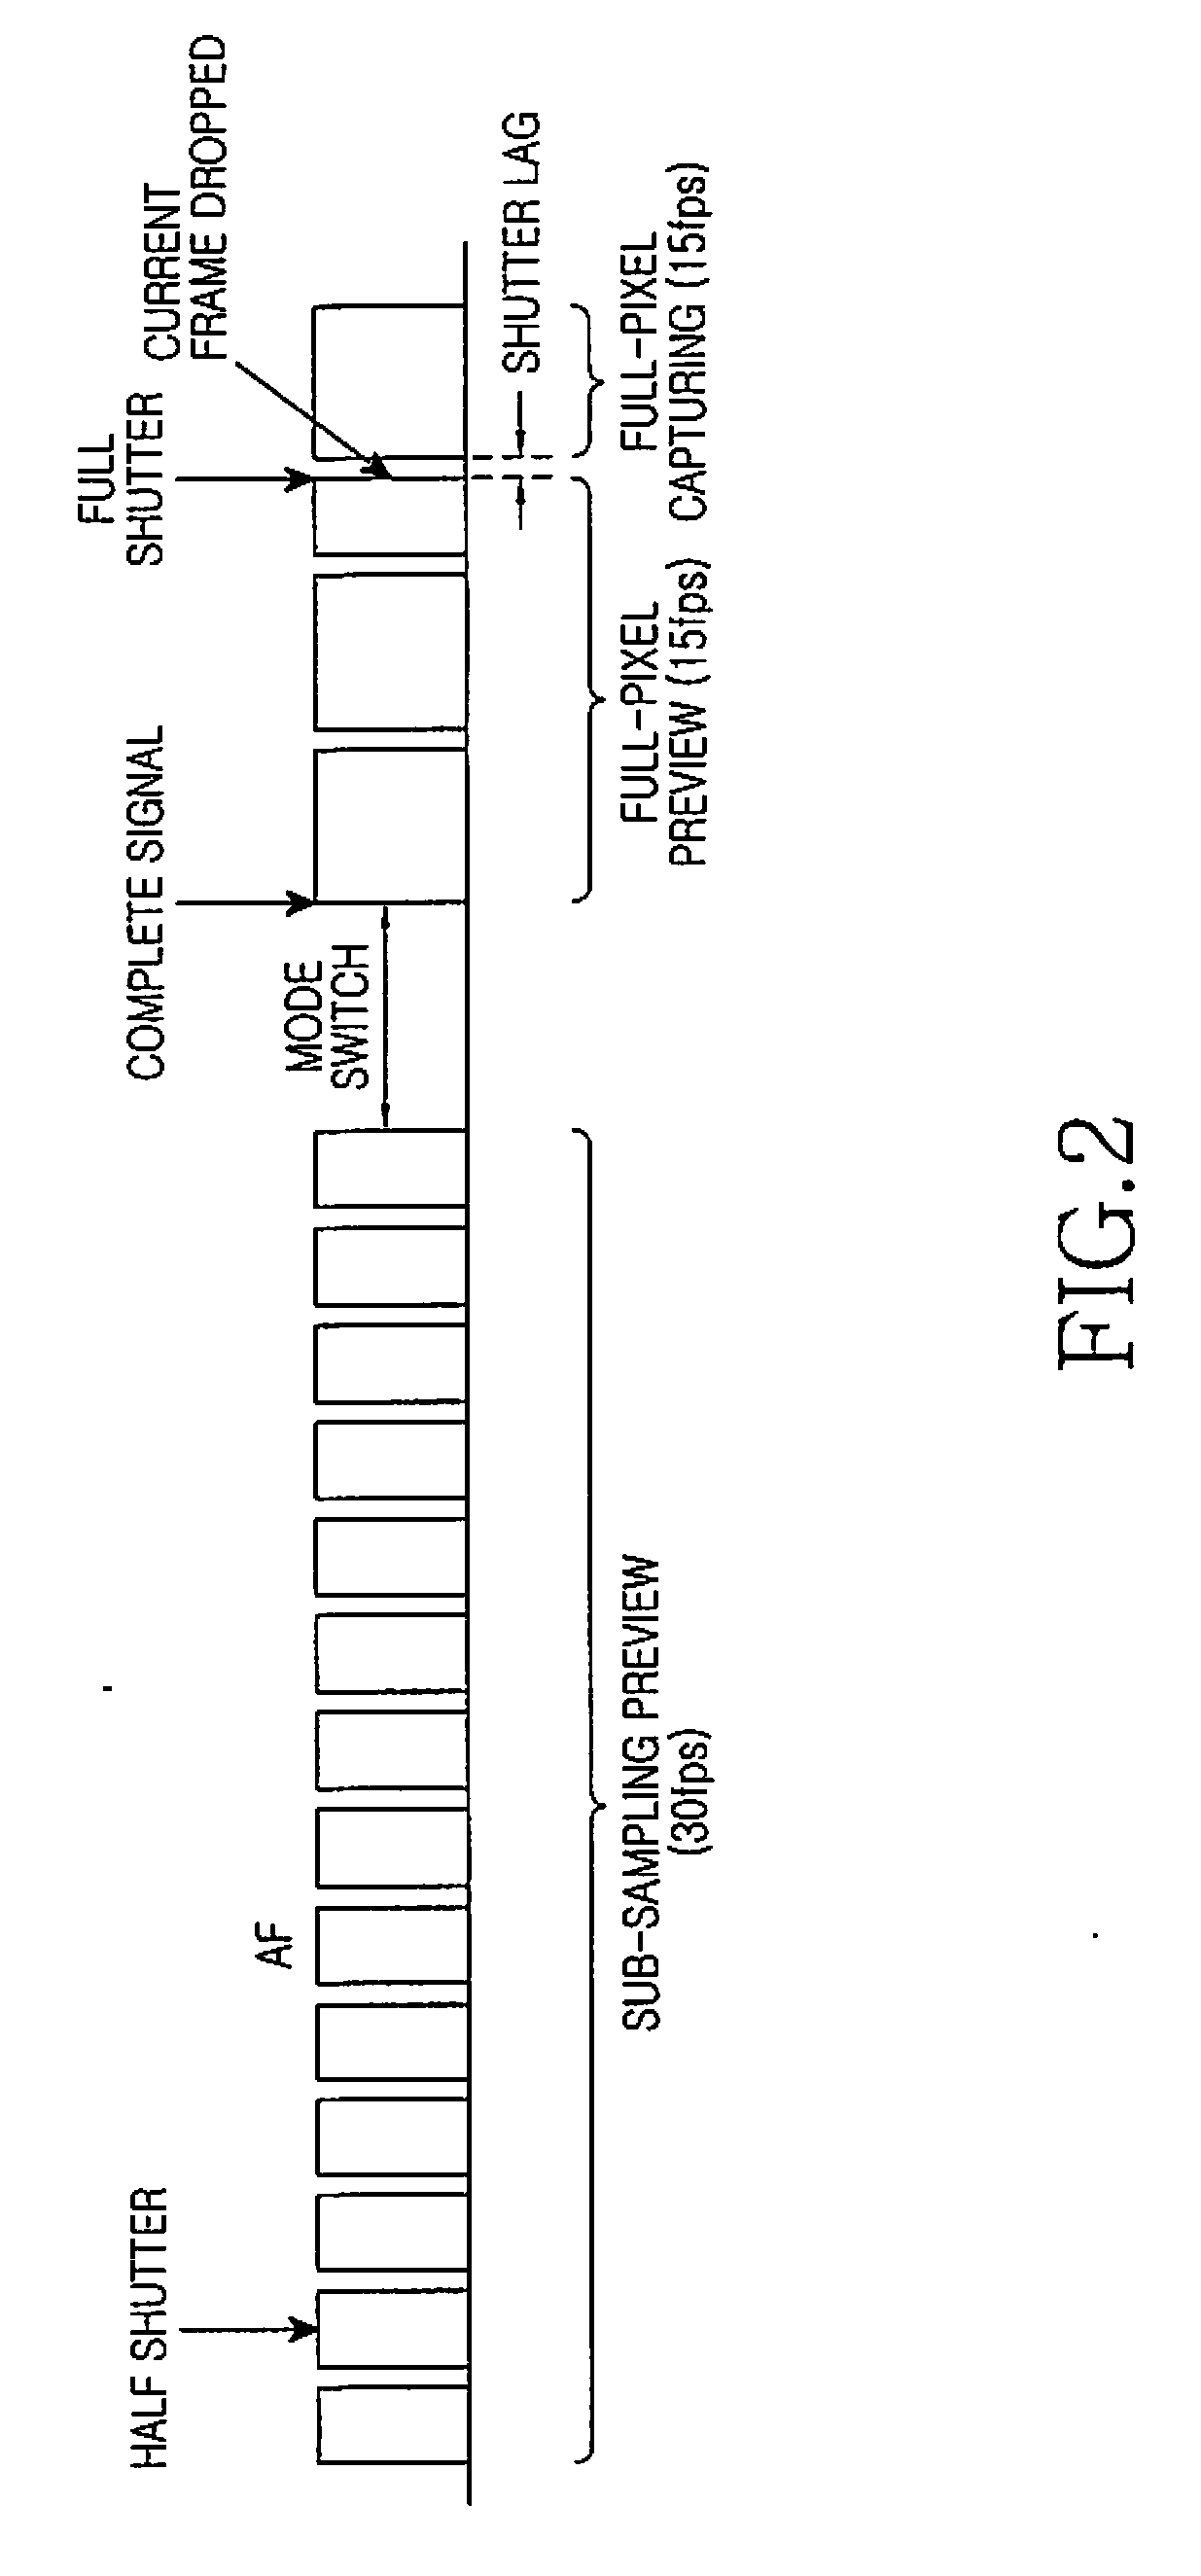 Apparatus and method for reducing shutter lag of a digital camera